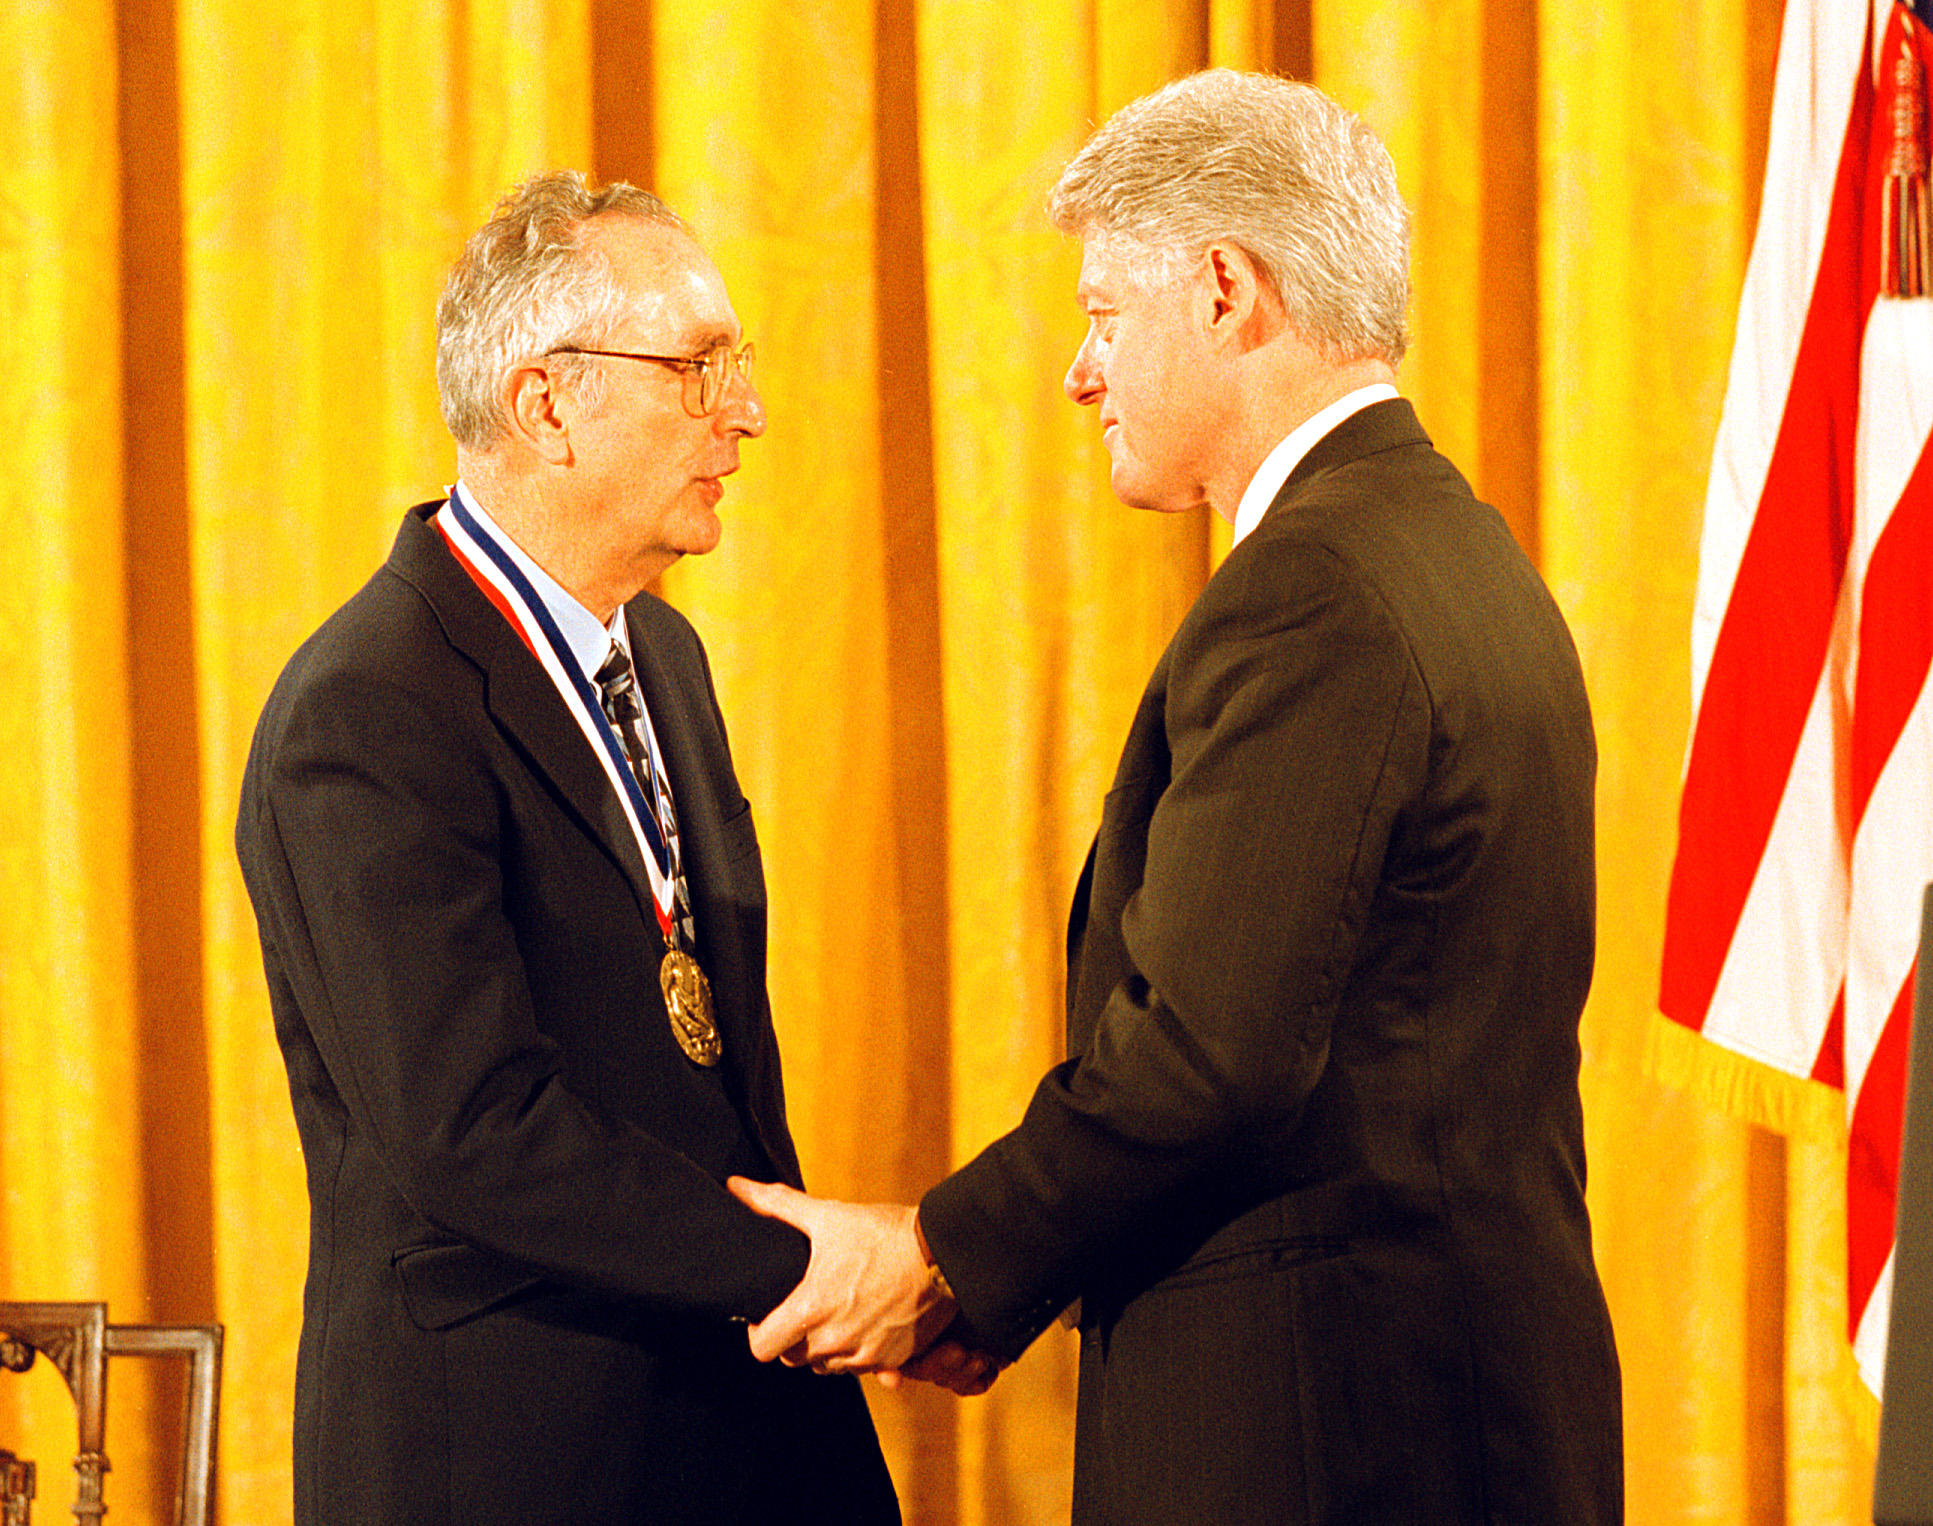 Astronomer John Bahcall (left) receives receives the Medal of Science from President Bill Clinton (right). The two are shaking hands.